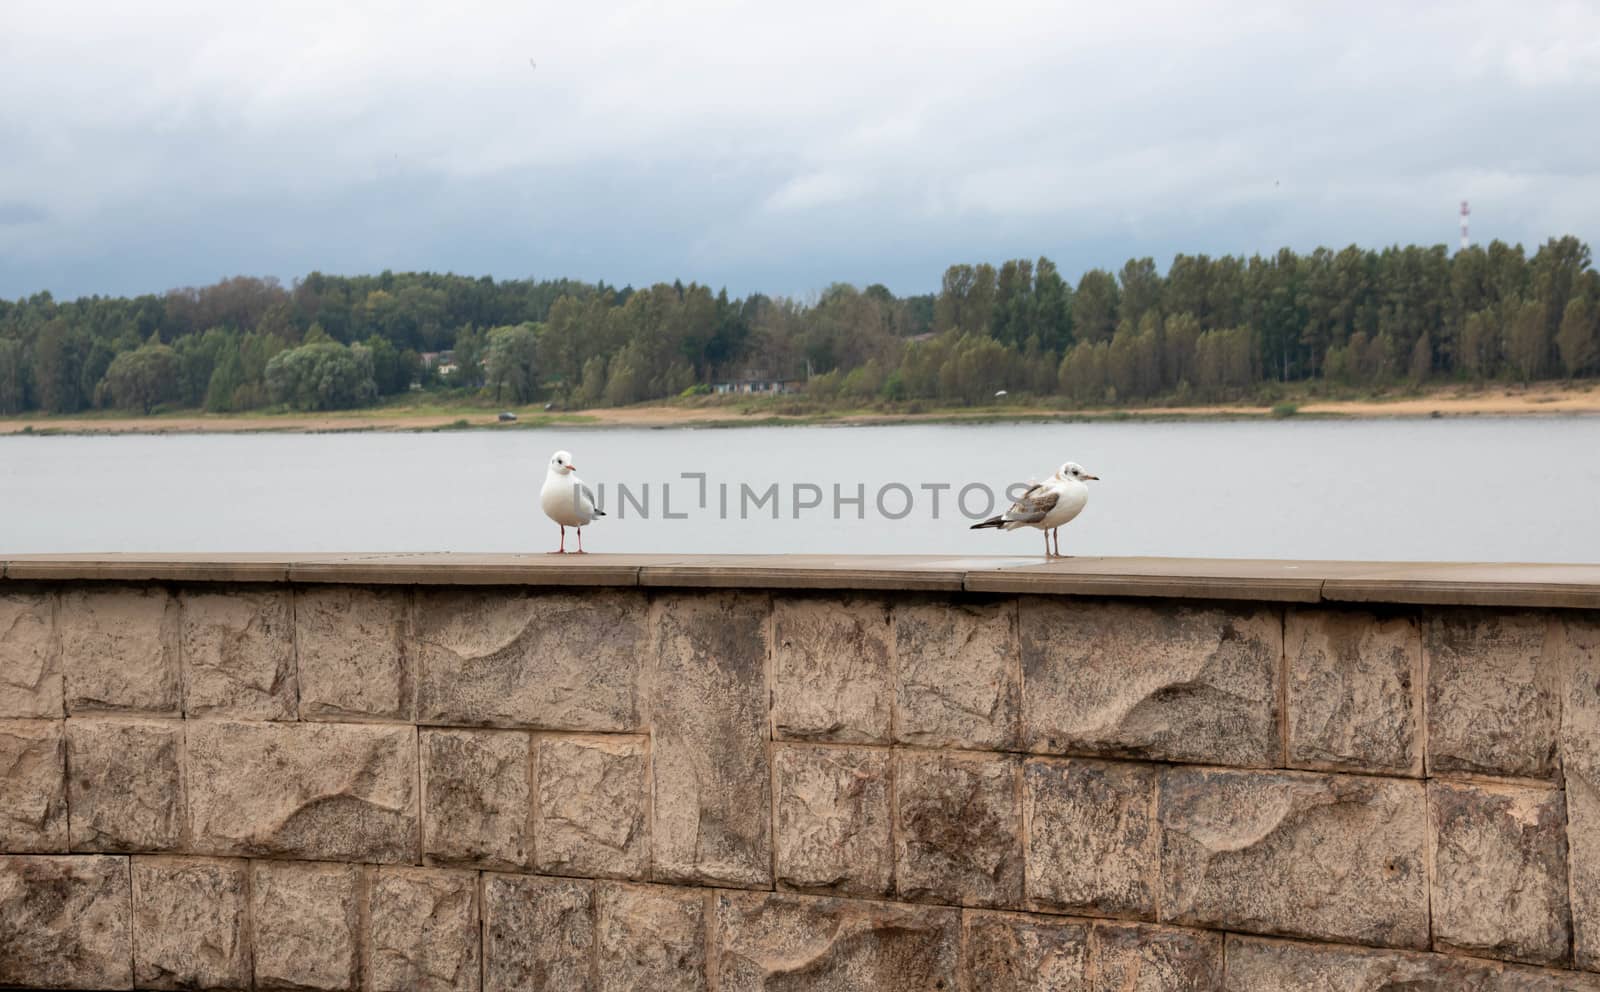 Two river gulls roam the parapet by the river on a cloudy autumn day.